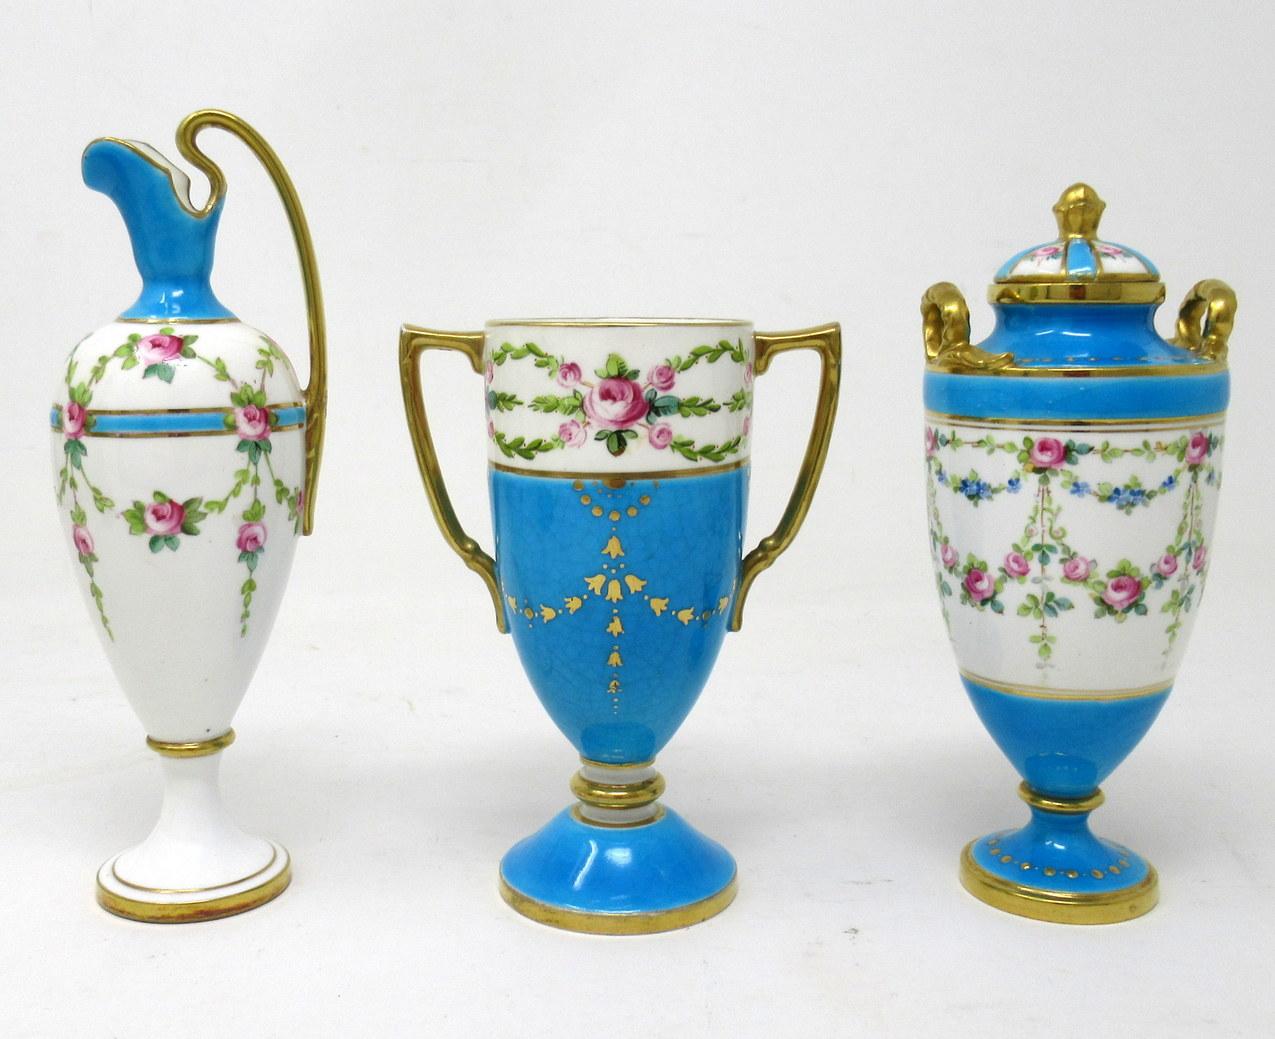 Stunning example of a collection of three miniature English Minton porcelain decorative items, a lidded twin handle Urn, a twin handle vase and a tall slender Ewer all of outstanding quality. 

Each decorated with old Summer Roses on a white and